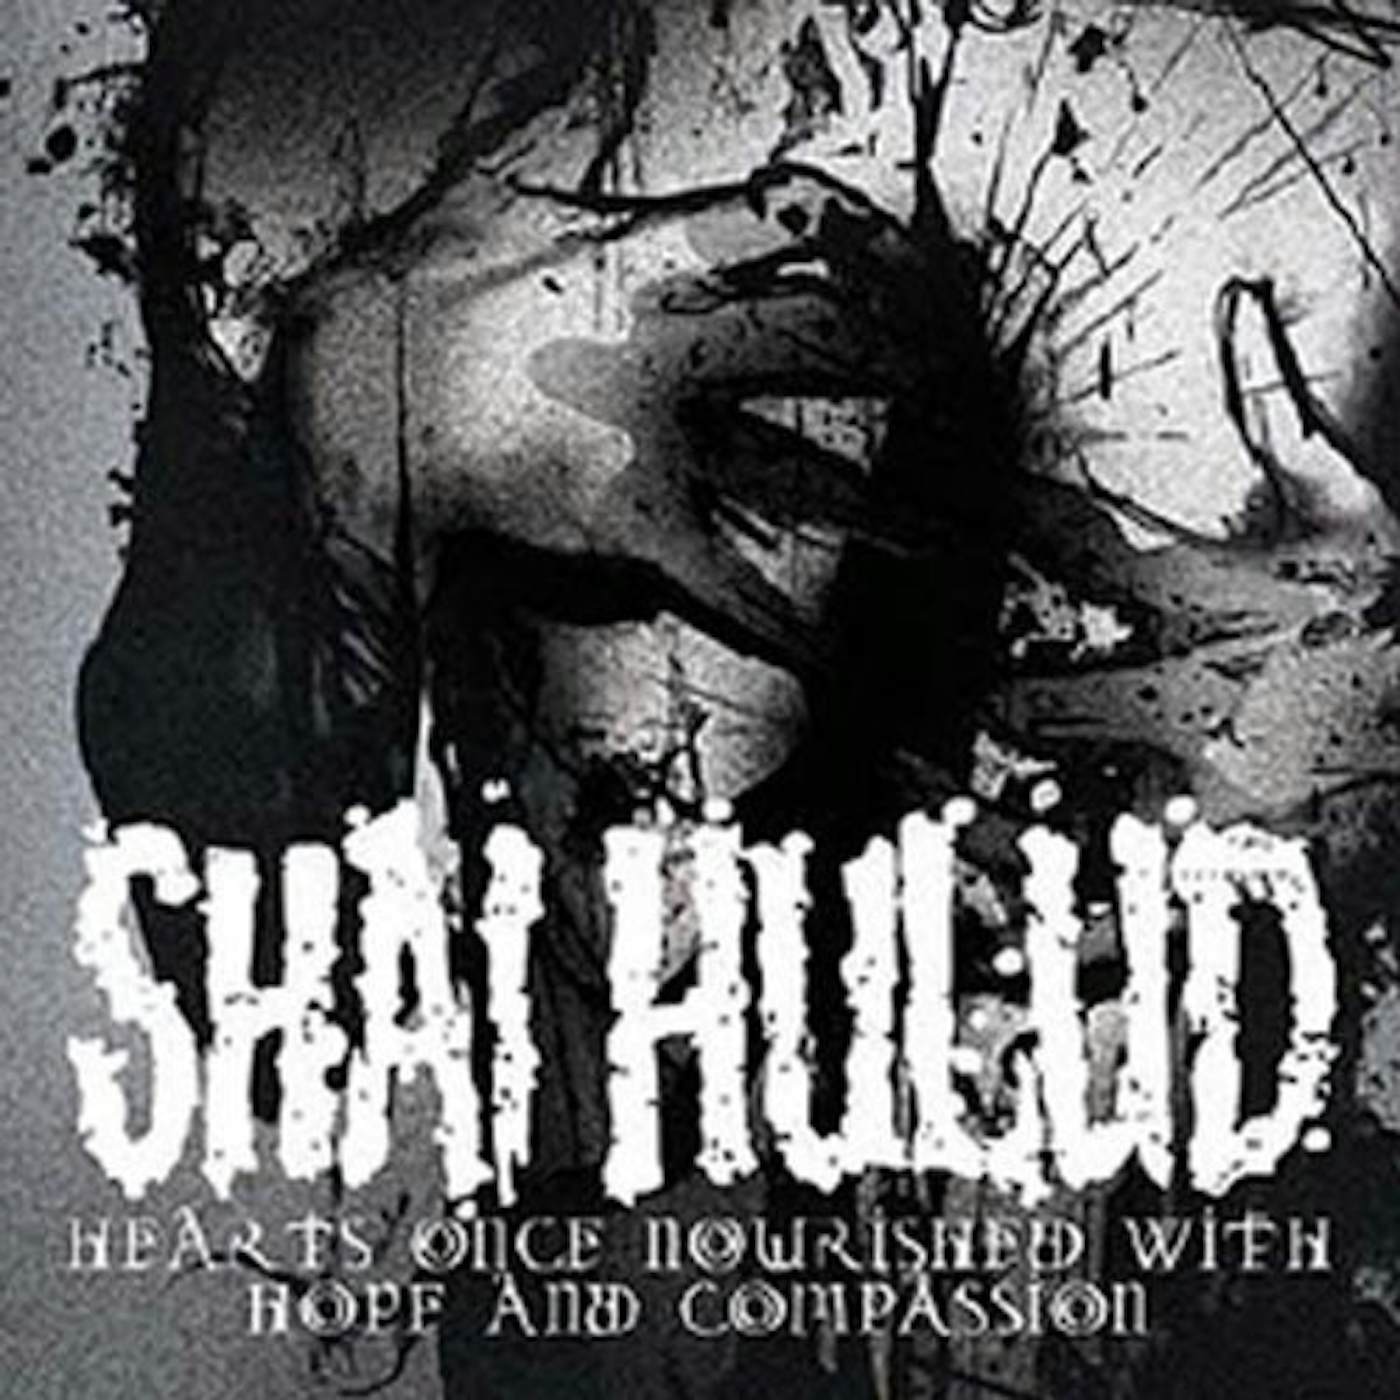 Shai Hulud HEARTS ONCE NOURISHED WITH HOPE & COMPASSION CD